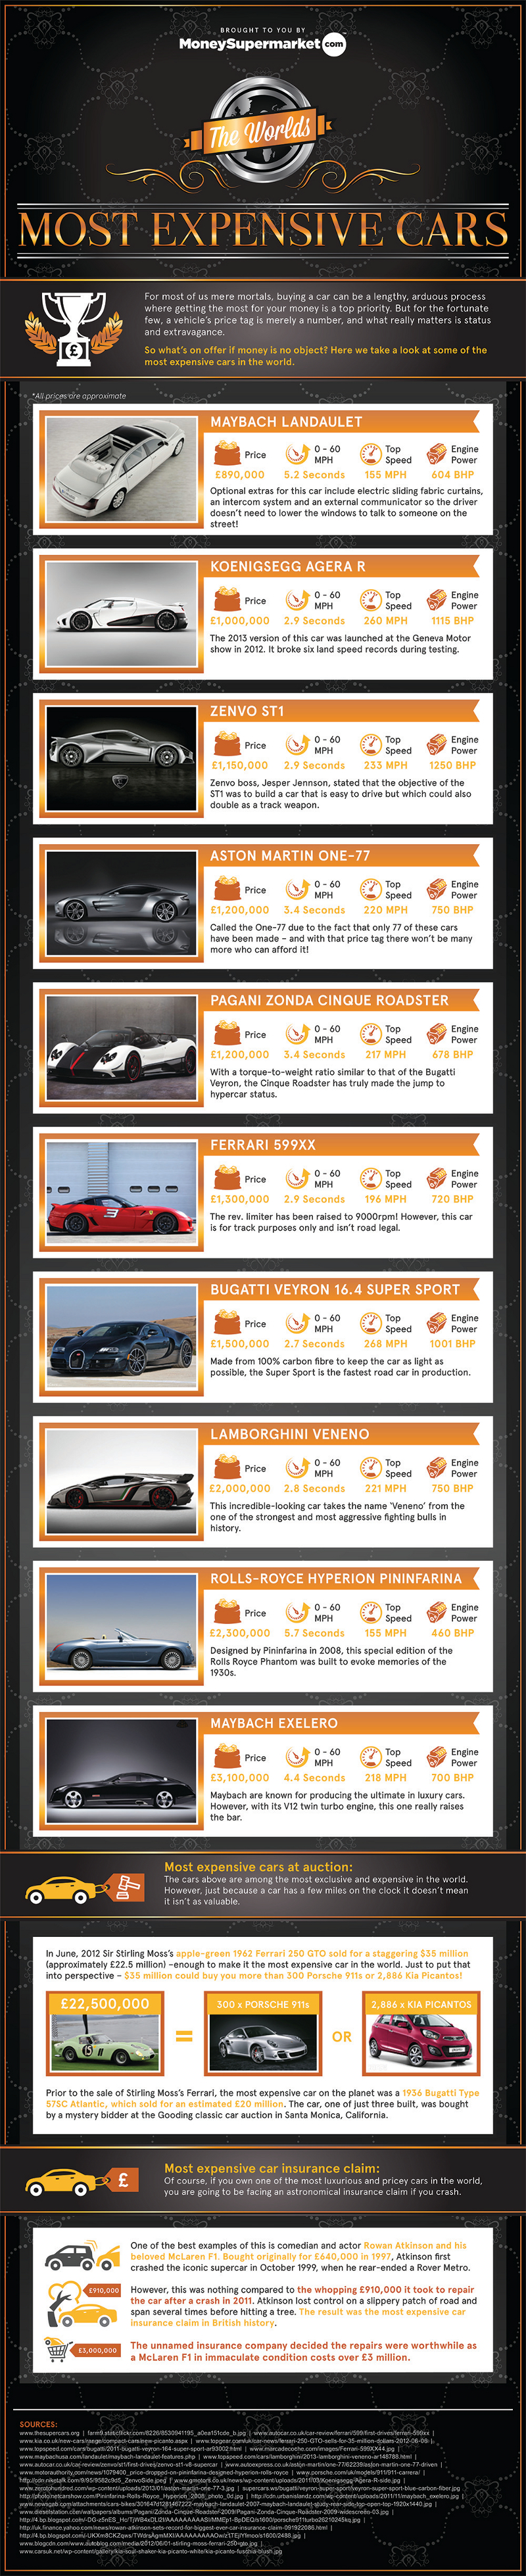 Top 10 Highest Priced Cars in the World